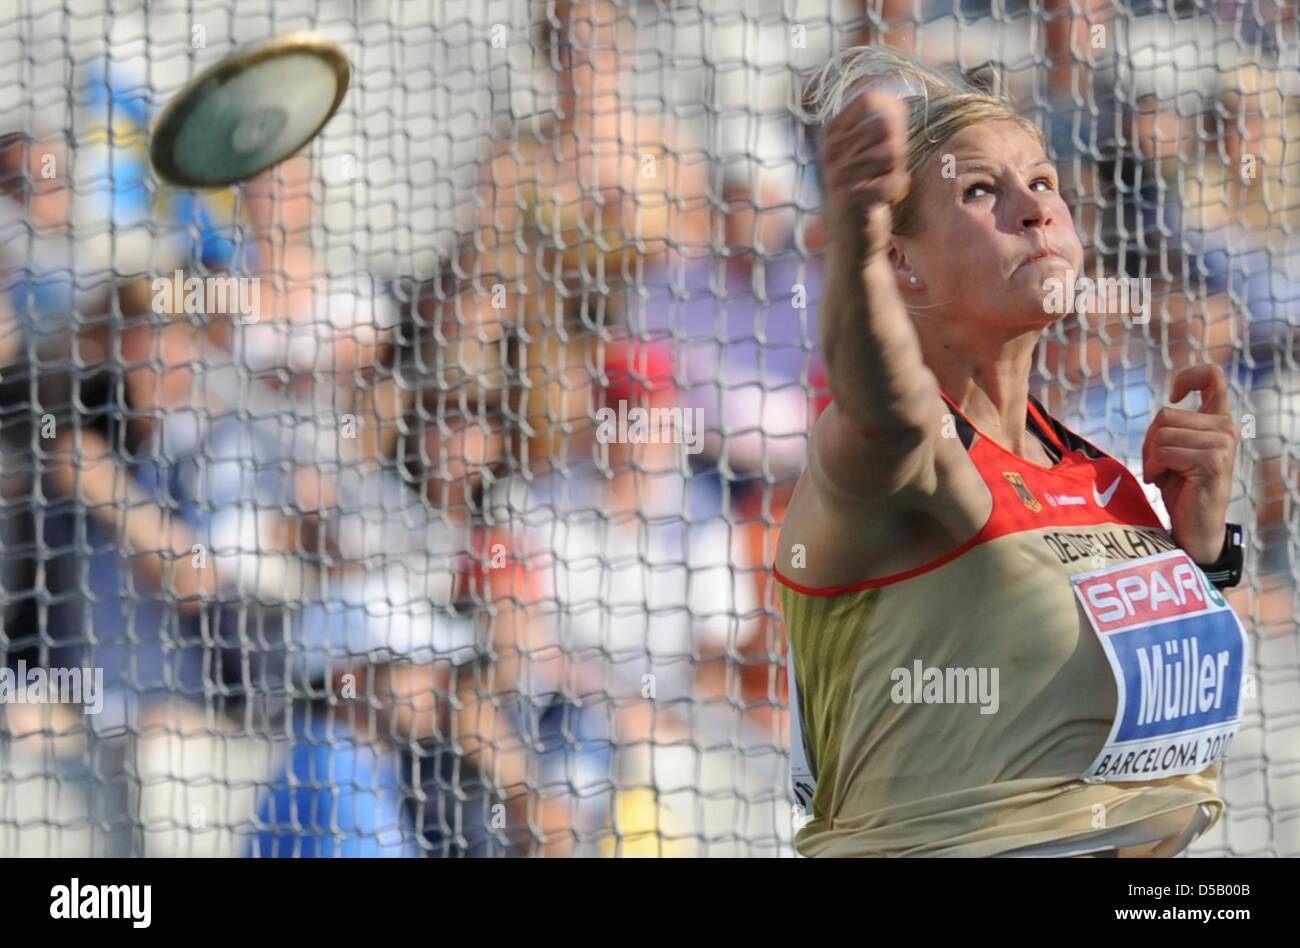 German Nadine Mueller throws a discus during the women's discus final at the European Athletics Championships in Barcelona, Spain, 28 July 2010. Photo: Rainer Jensen Stock Photo